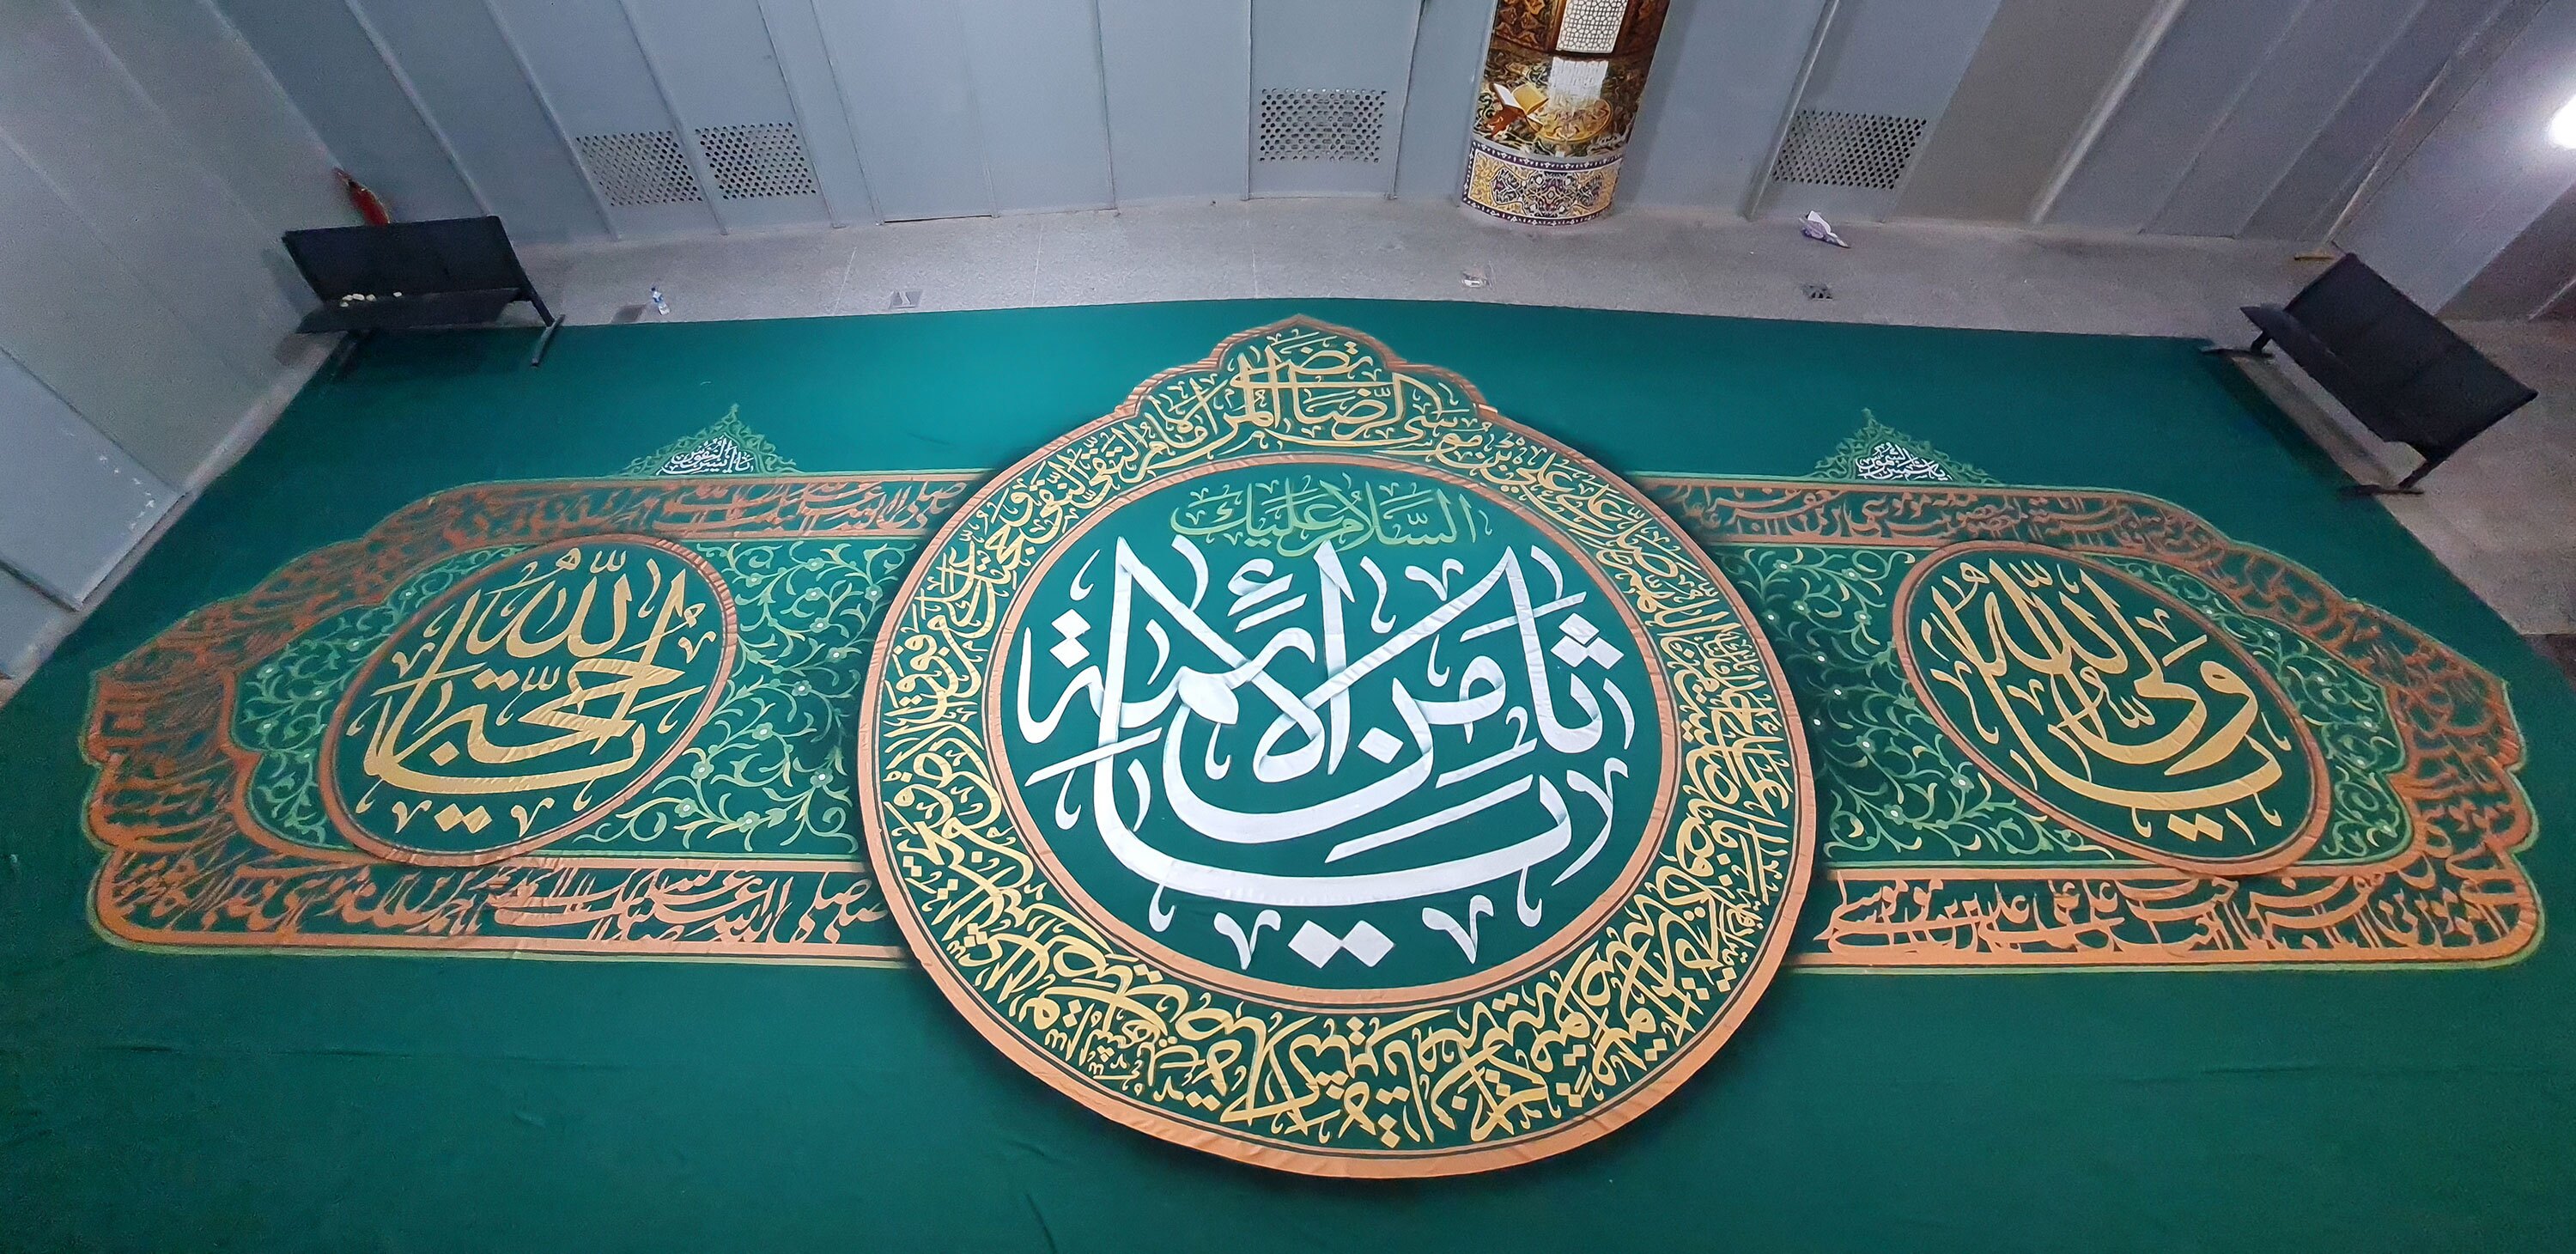 Calligraphy works prepared for birth anniversary of Imam Redha (peace be upon him)